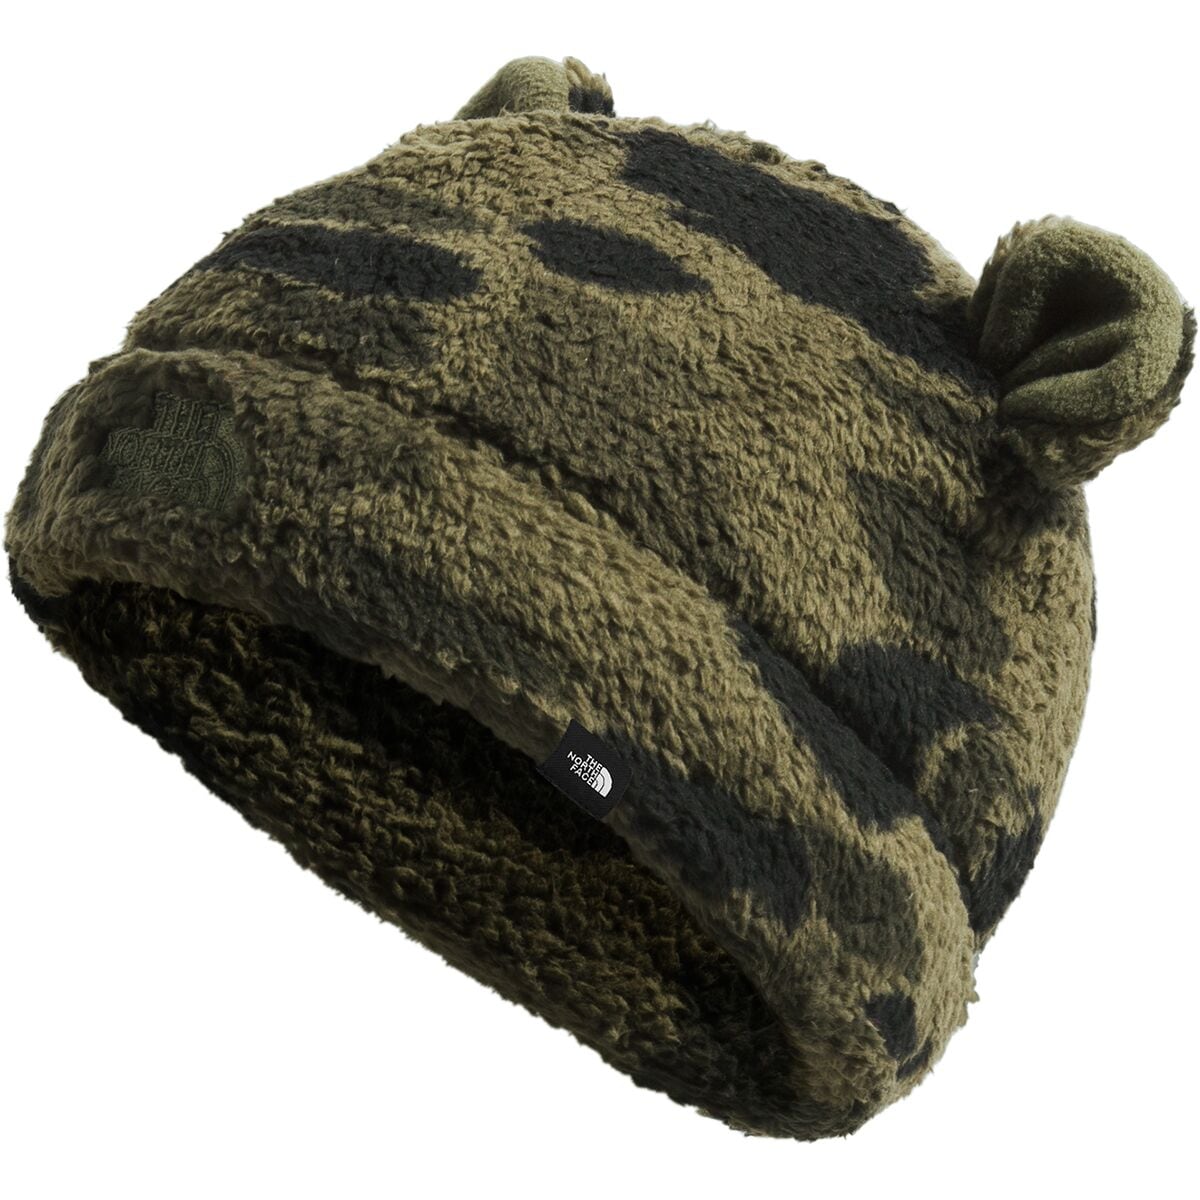 north face baby bear hat